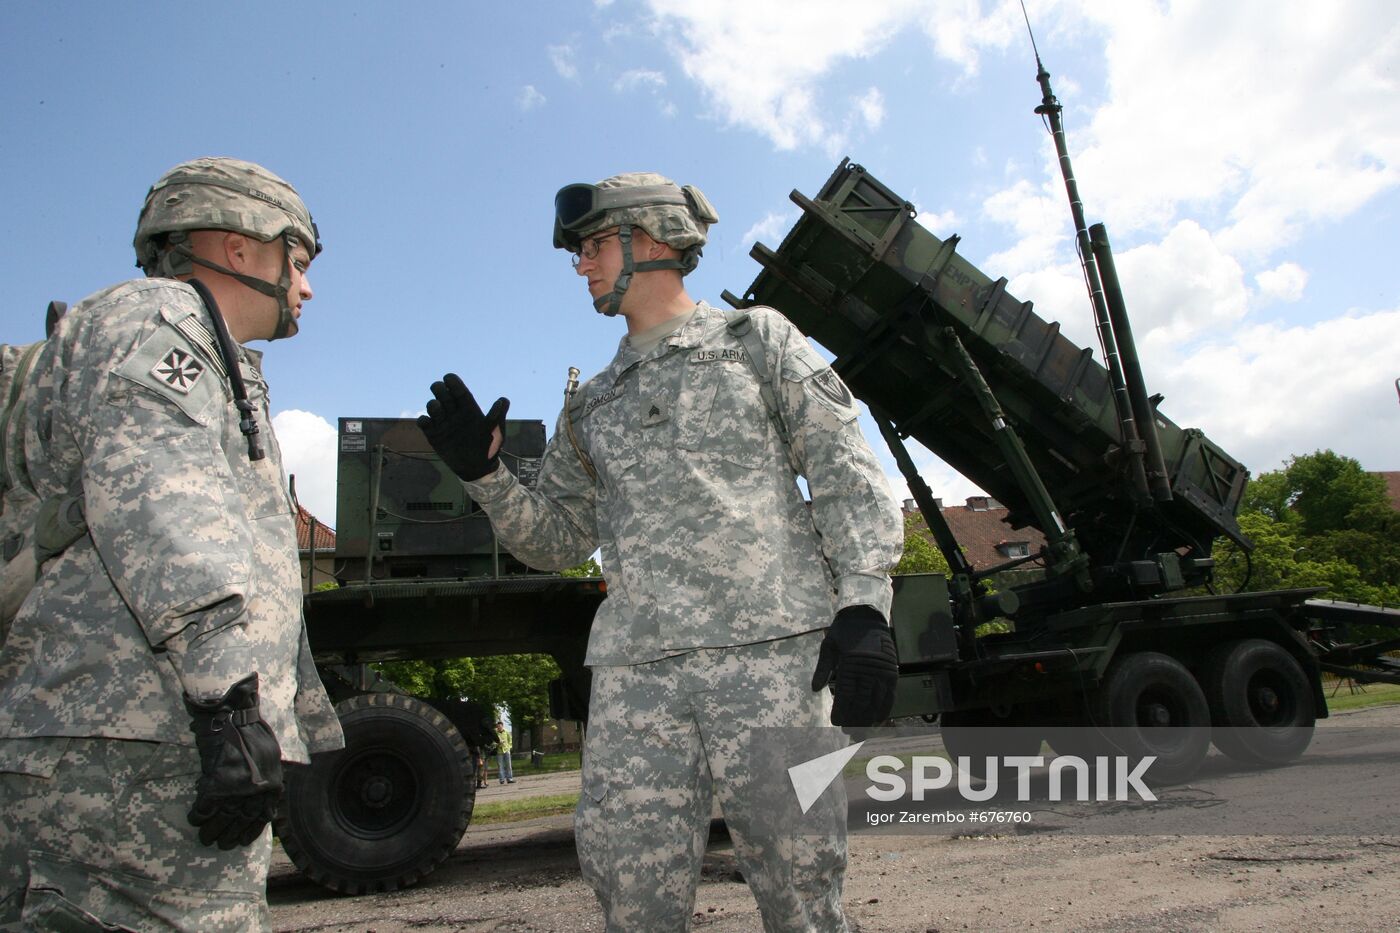 American Patriot missiles deployed in Poland